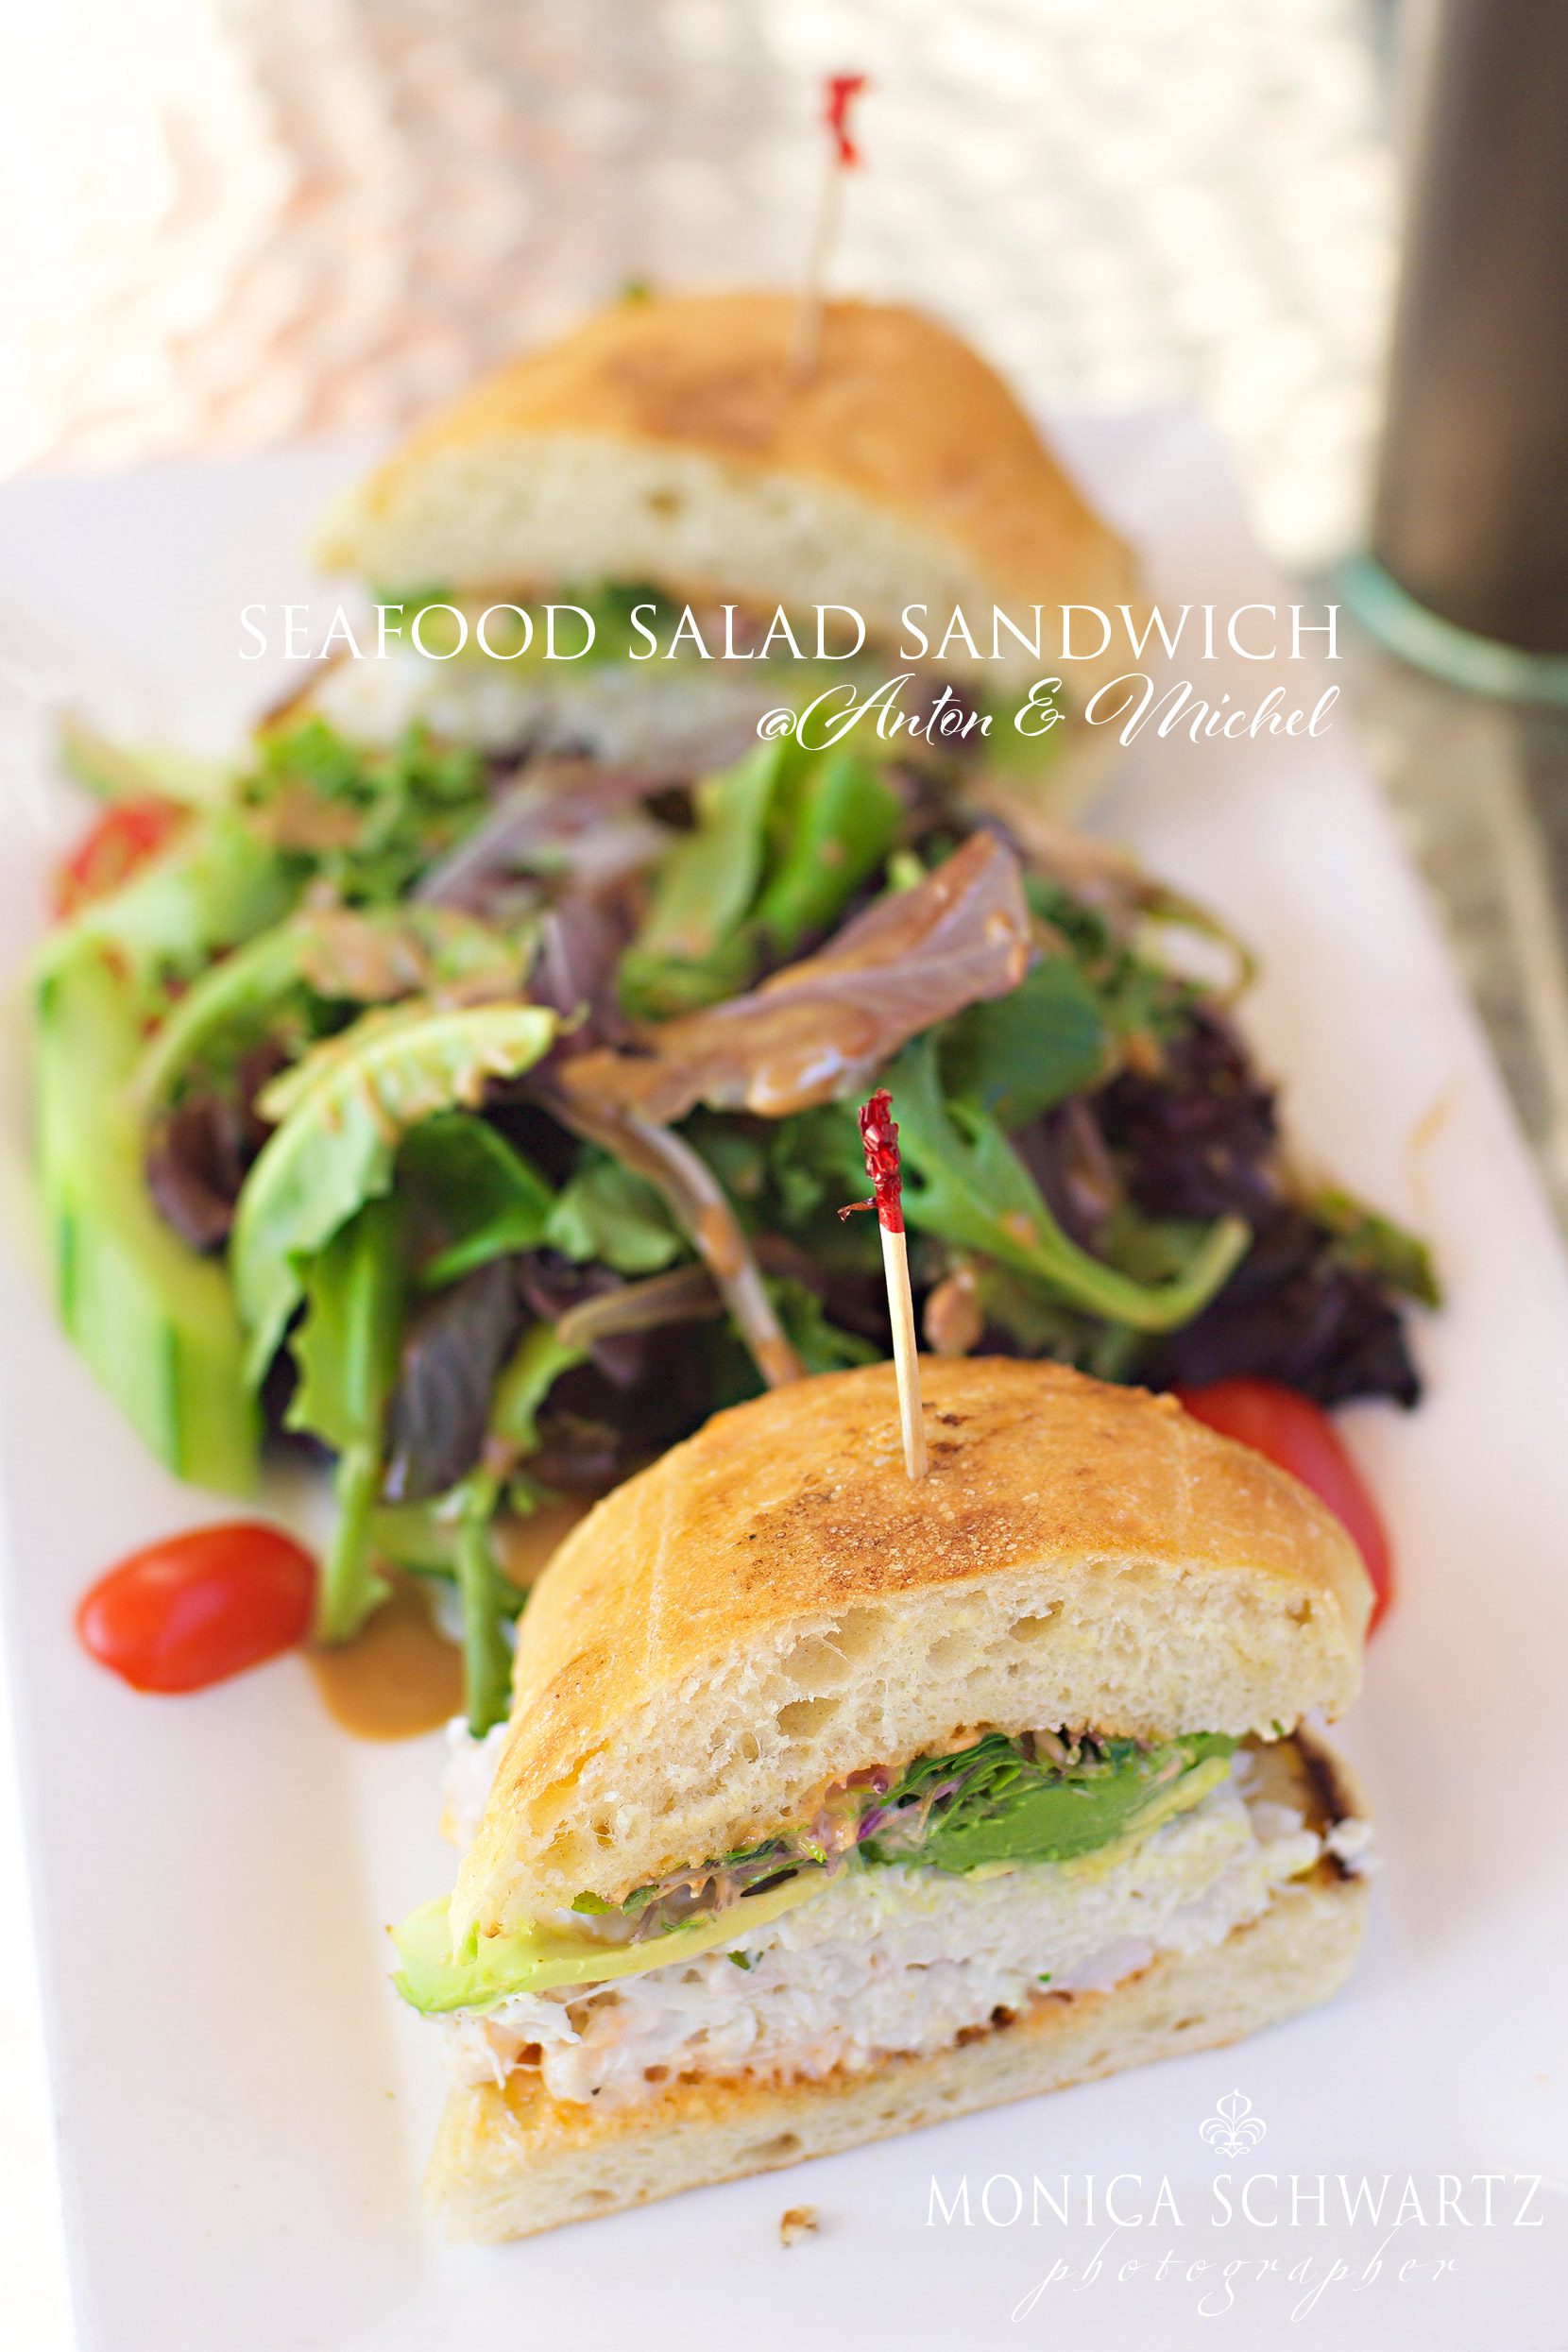 Seafood-Sandwich-with-Salad-at-Anton-and-Michel-restaurant-Carmel-by-the-Sea-California